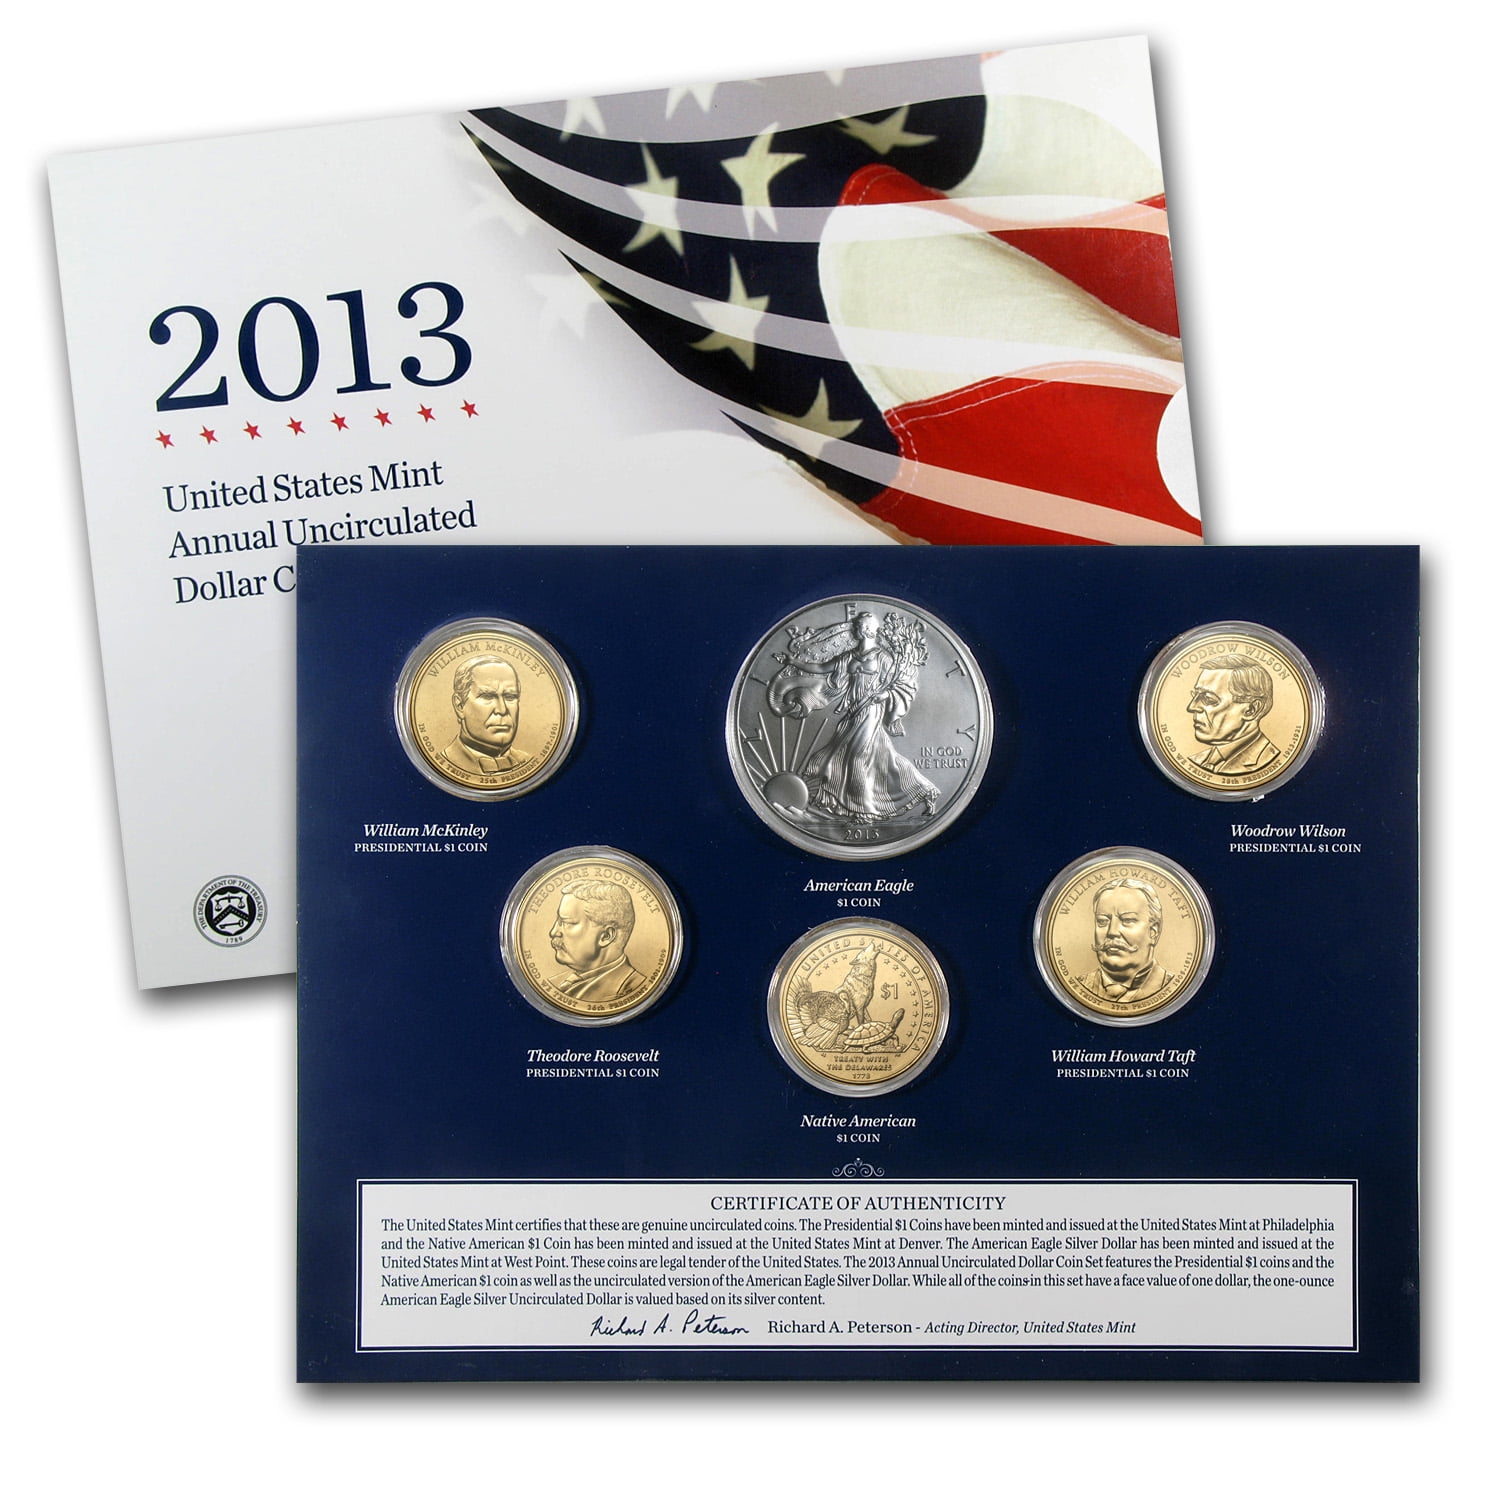 2013 US MINT ANNUAL UNCIRCULATED DOLLAR COIN SET 